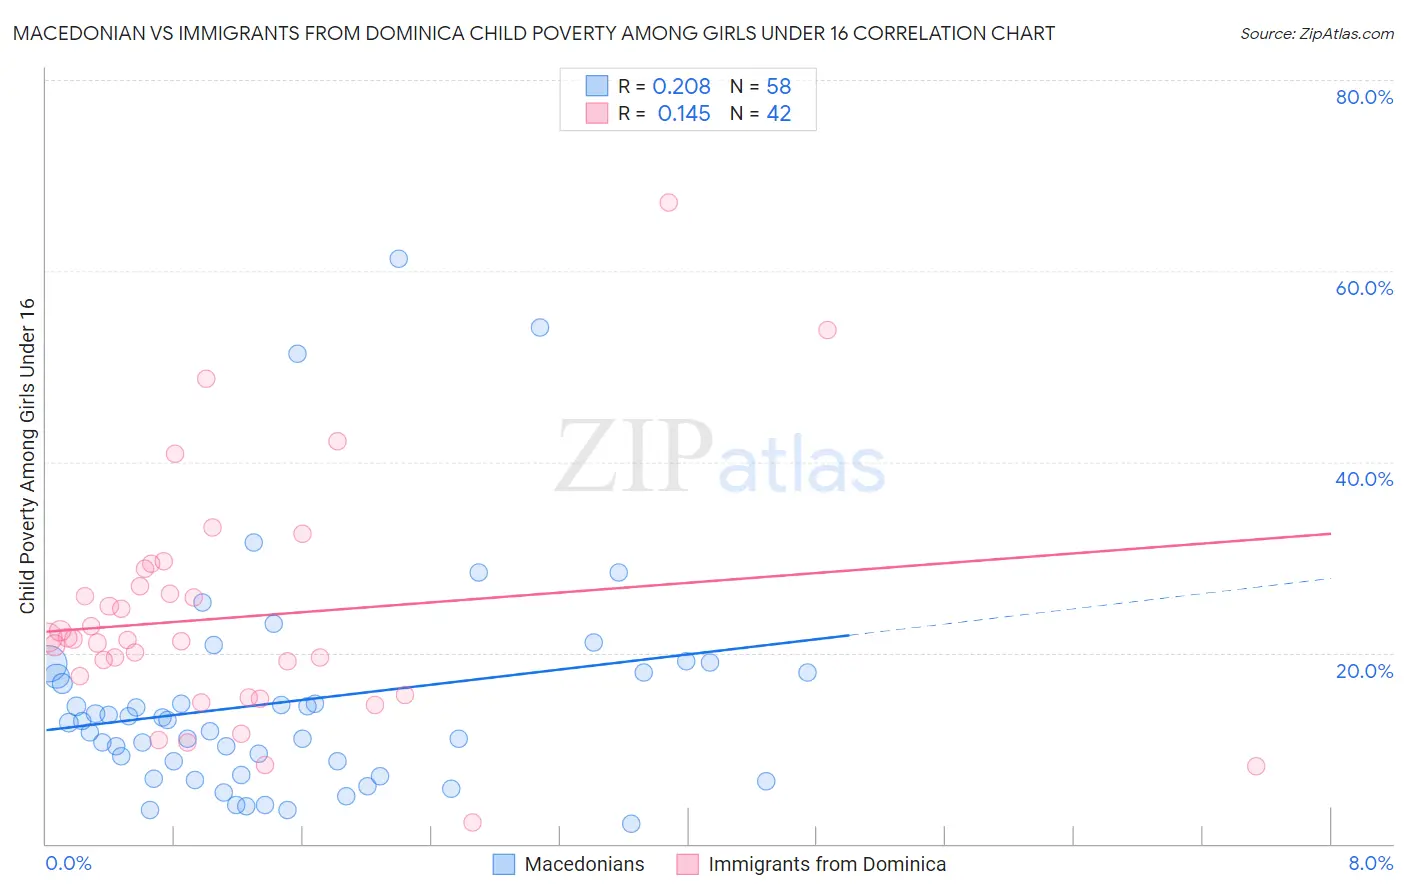 Macedonian vs Immigrants from Dominica Child Poverty Among Girls Under 16